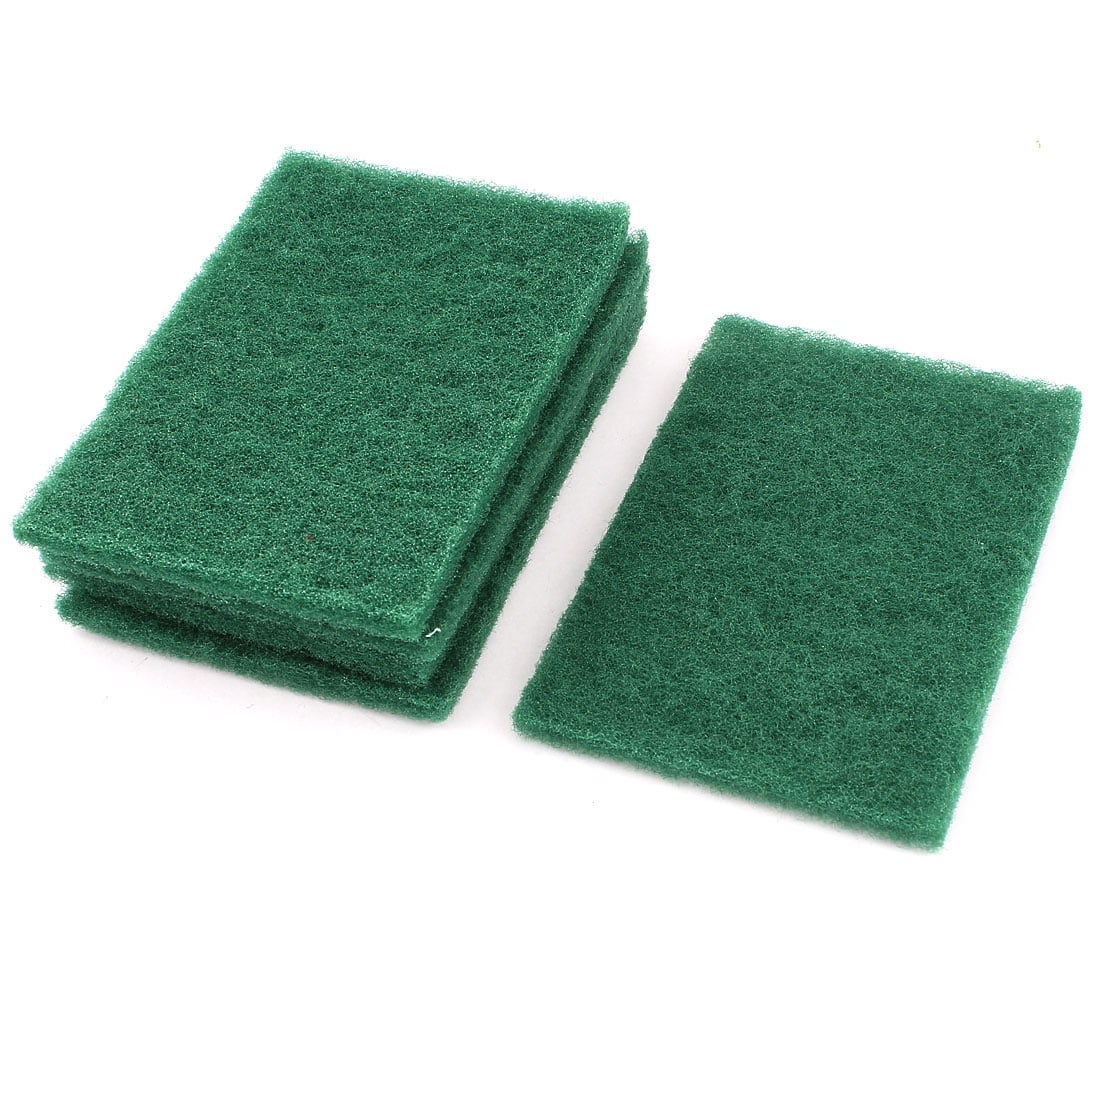 5Pcs Sponge Cleaner Kitchen Cleaning Dish Pot Bowl Wash Scouring Pad Scrubber 